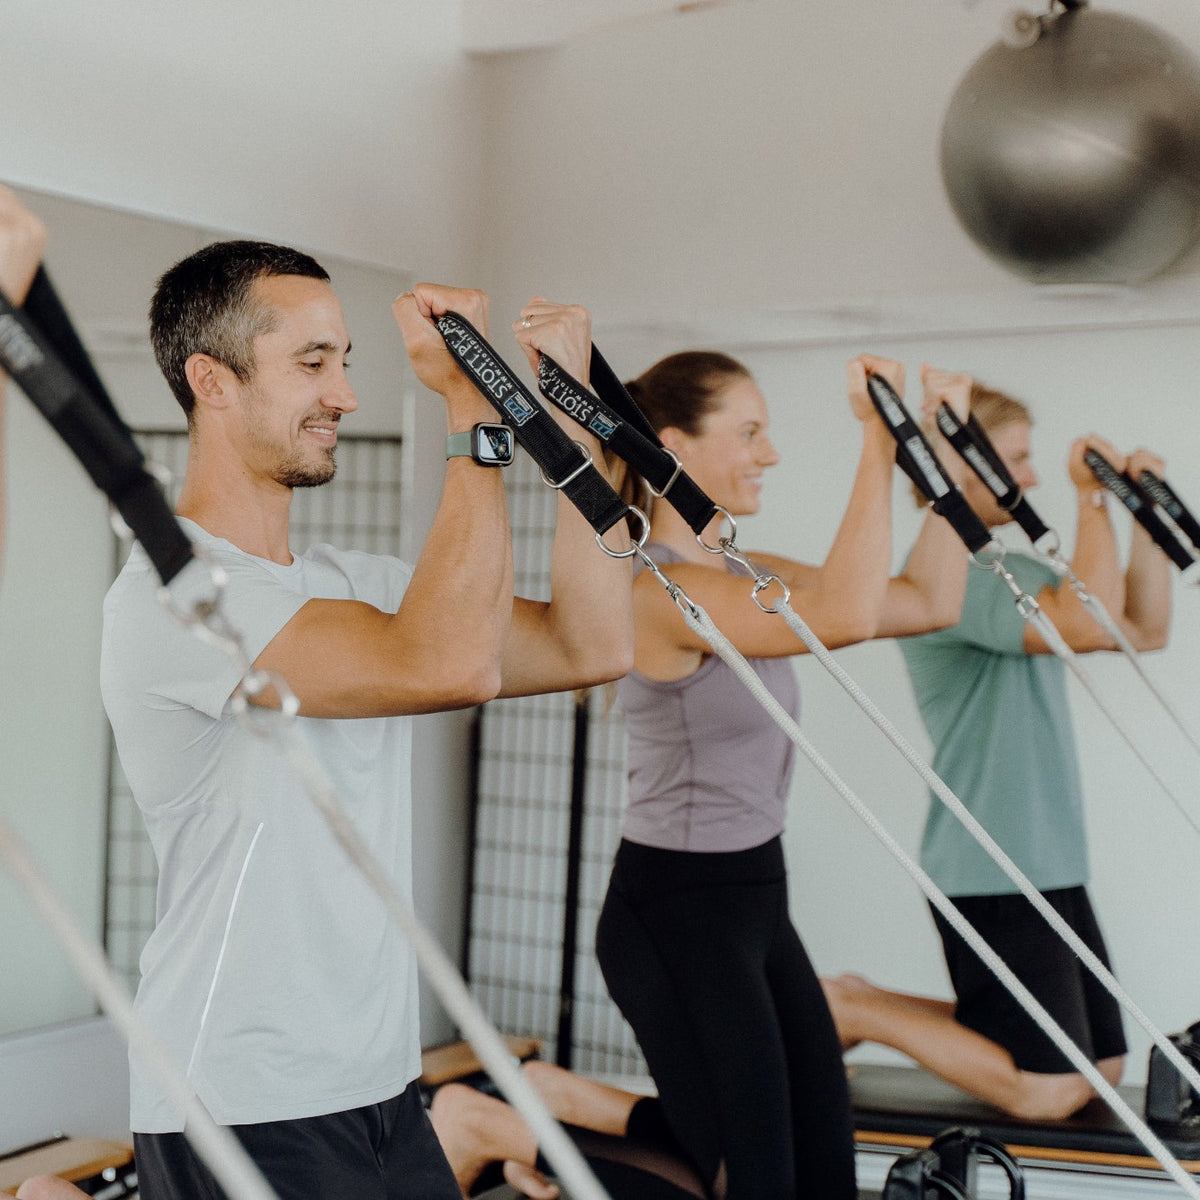 Reformer Pilates Classes. Workout at Suna Pilates in Takapuna Auckland